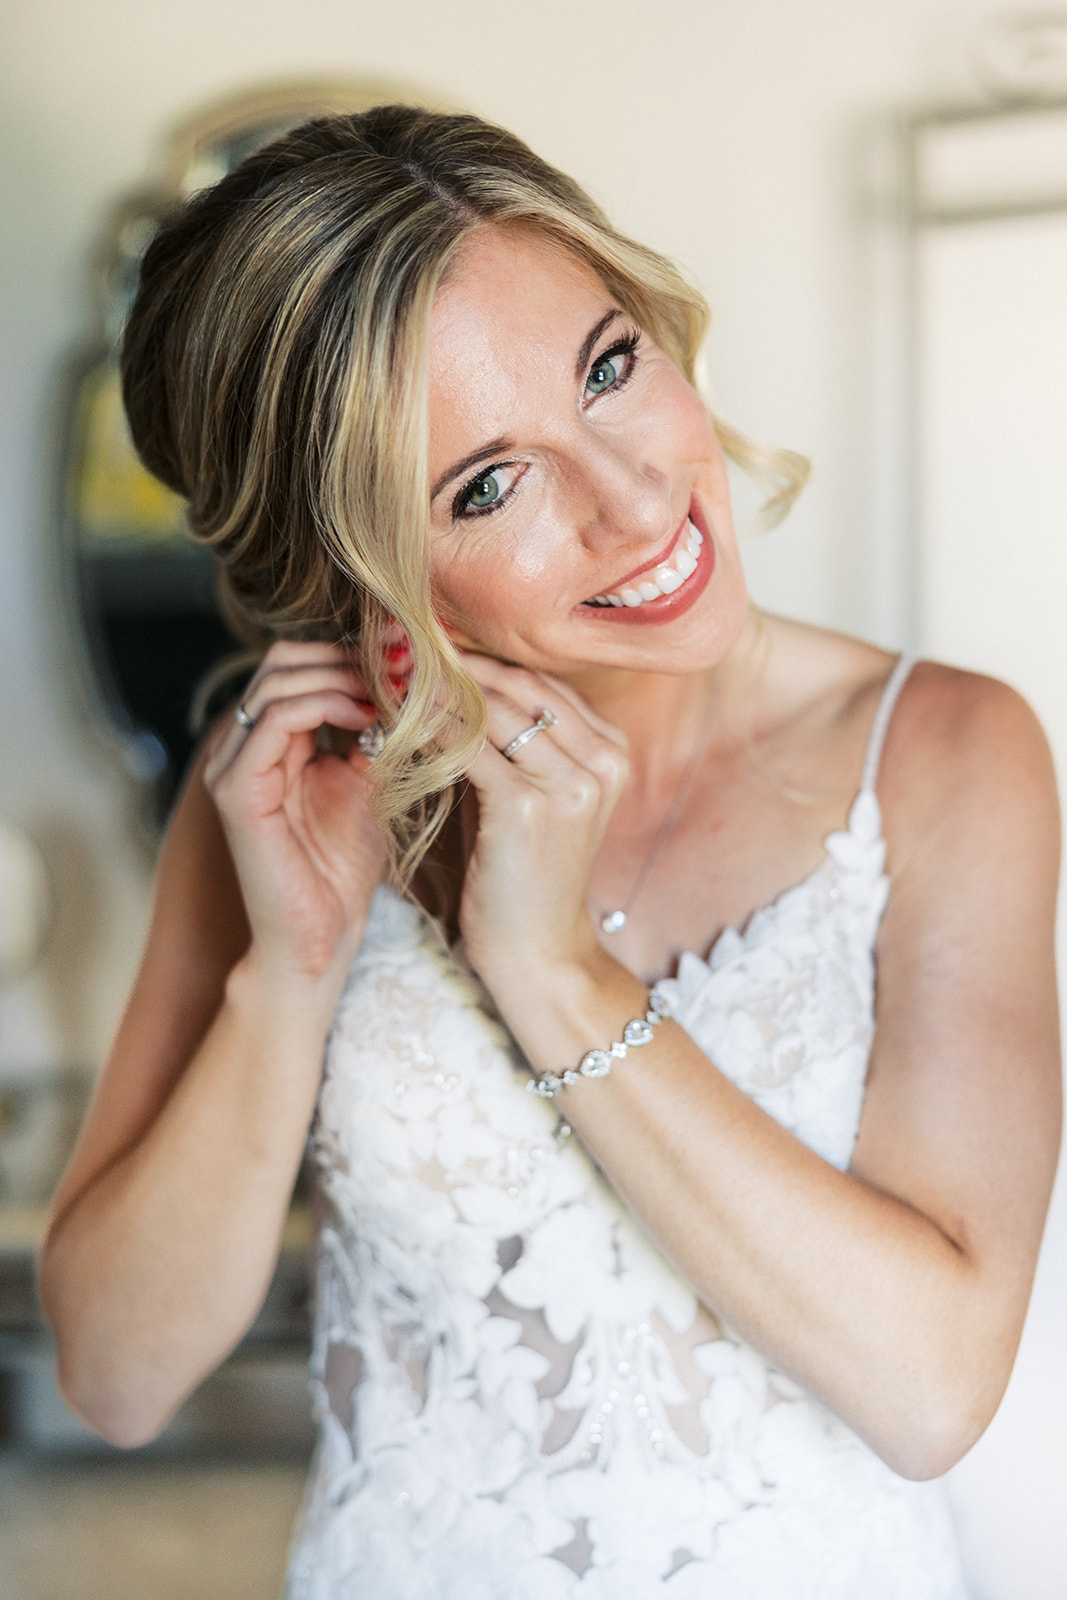 A bride smiles while putting on her earrings in a lace dress